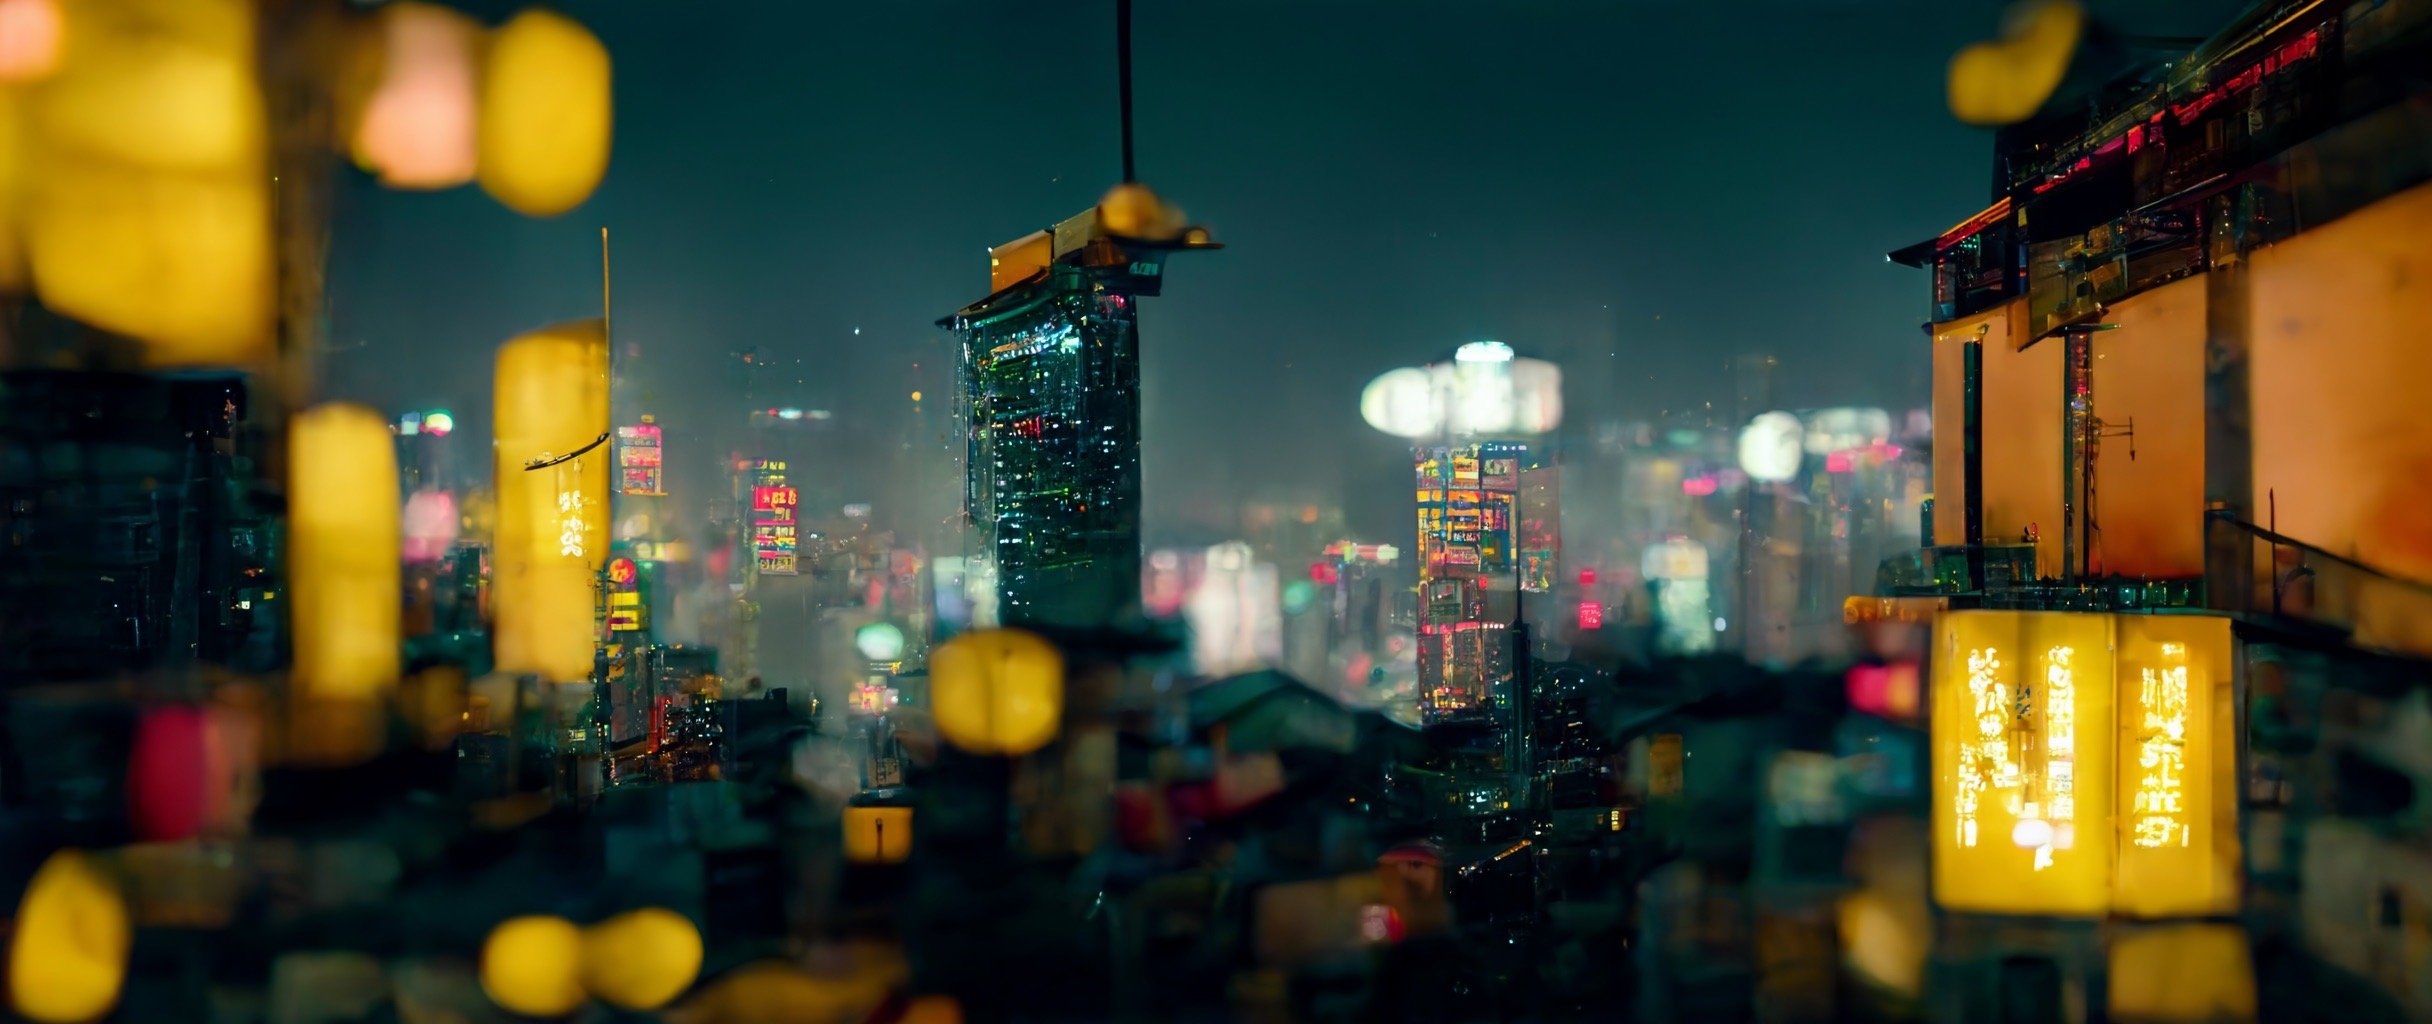 0e179c4f-ceac-4956-af31-3f93e1eb4d3b_S3RAPH_noodle_night._long_exposure_of_big_city_streets_from_a_high_angle._Lots_of_detailed_buildings._cinem.JPG